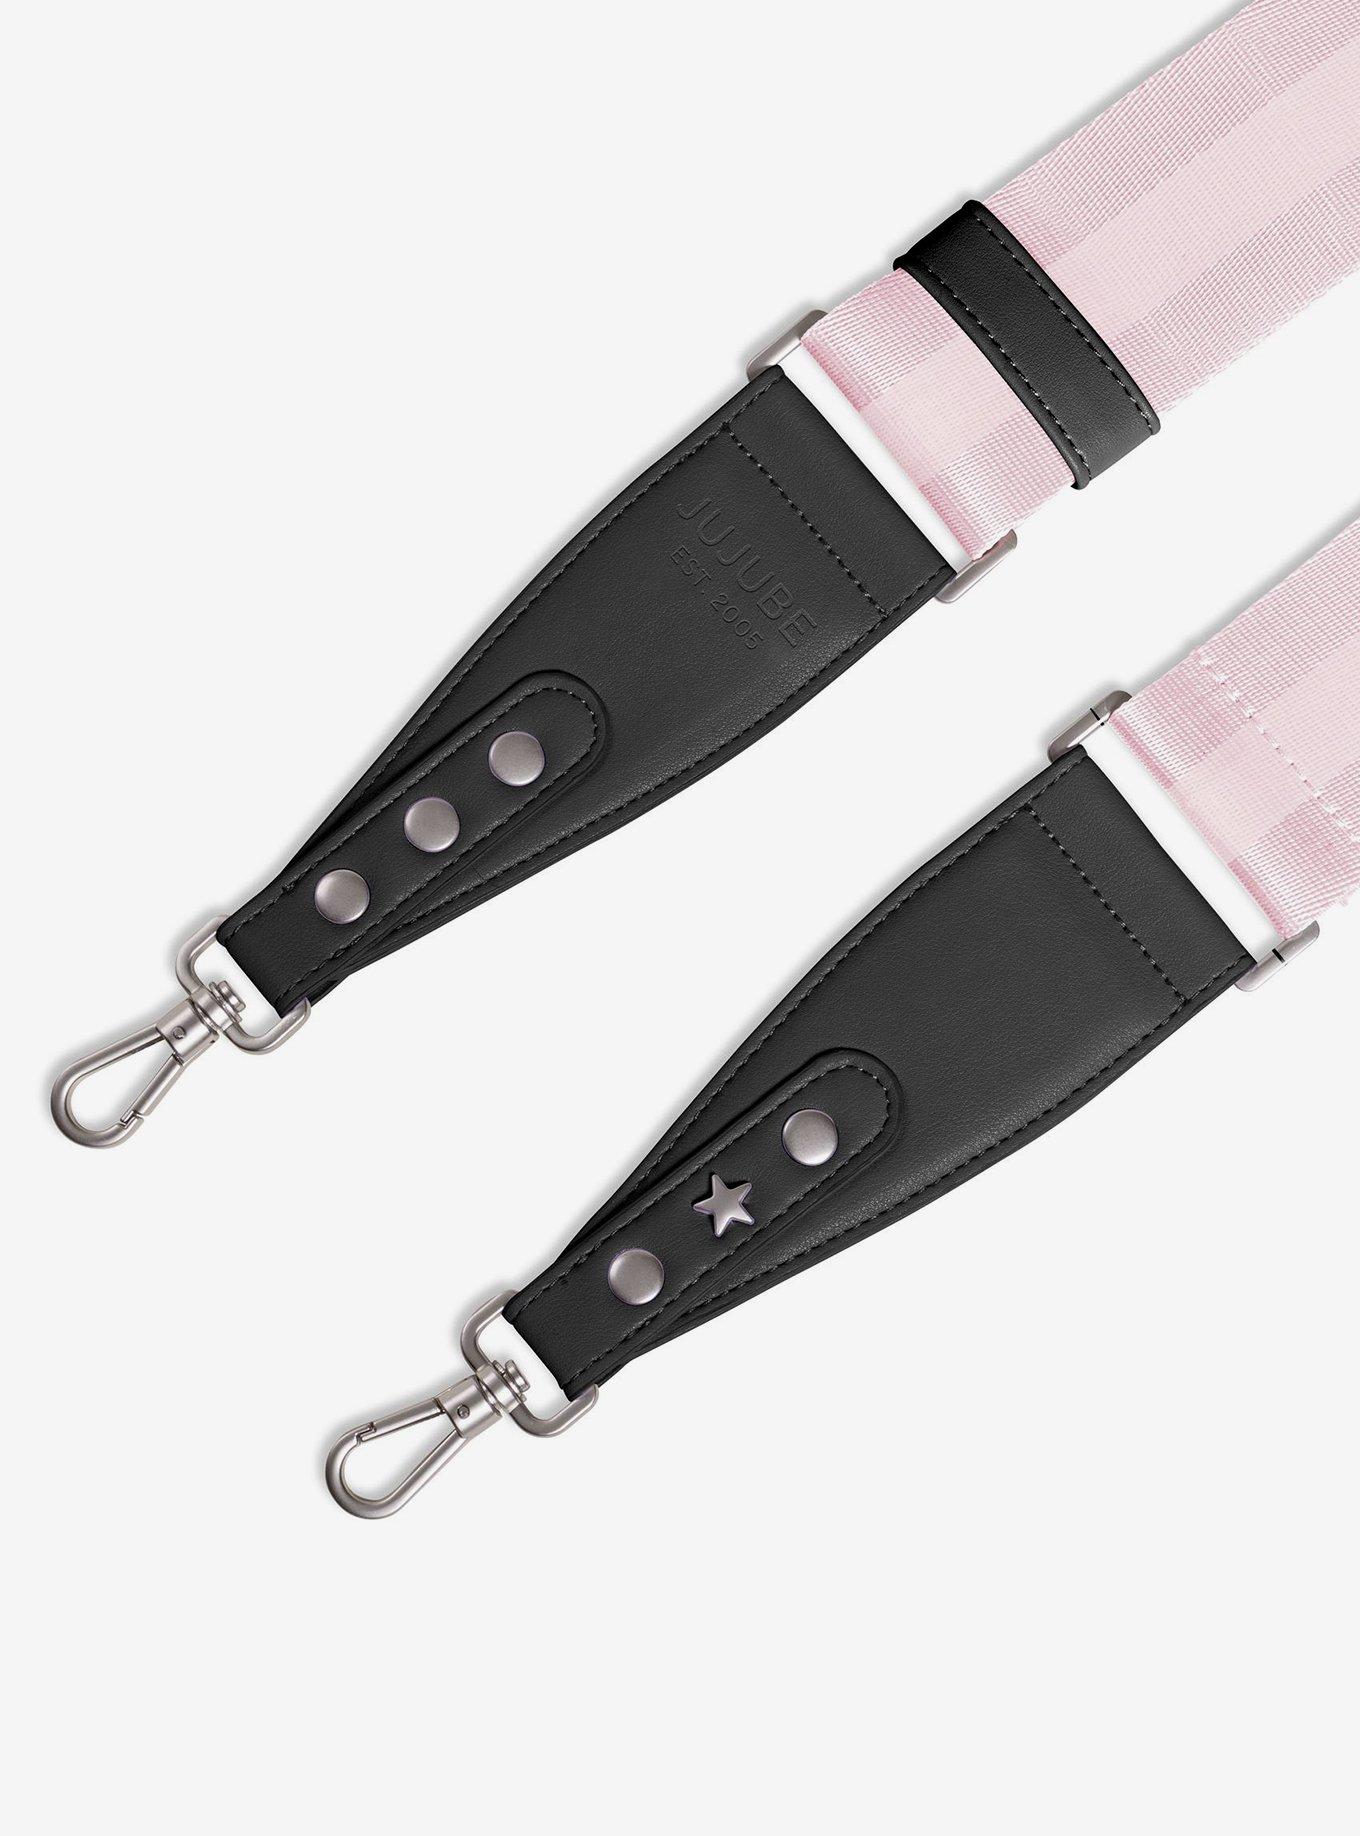 JuJuBe Woven Bag Straps Pink with Black